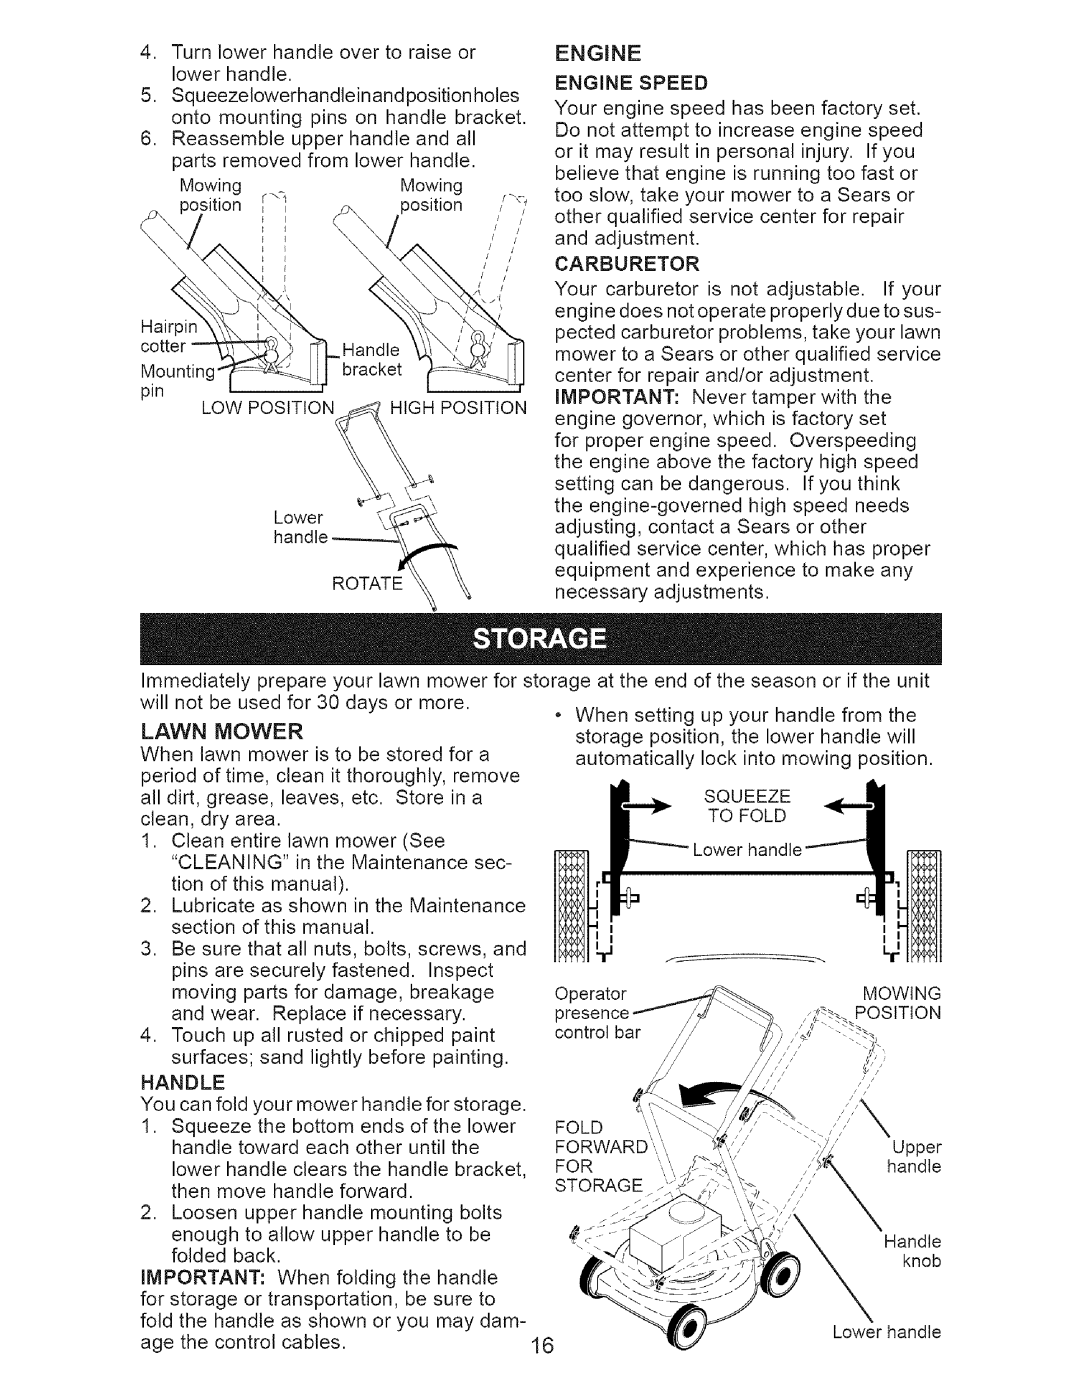 Craftsman 917.376674 owner manual Turnlower handleover to raiseor lower handle, Mowing, position -_, 3osition, Engine 